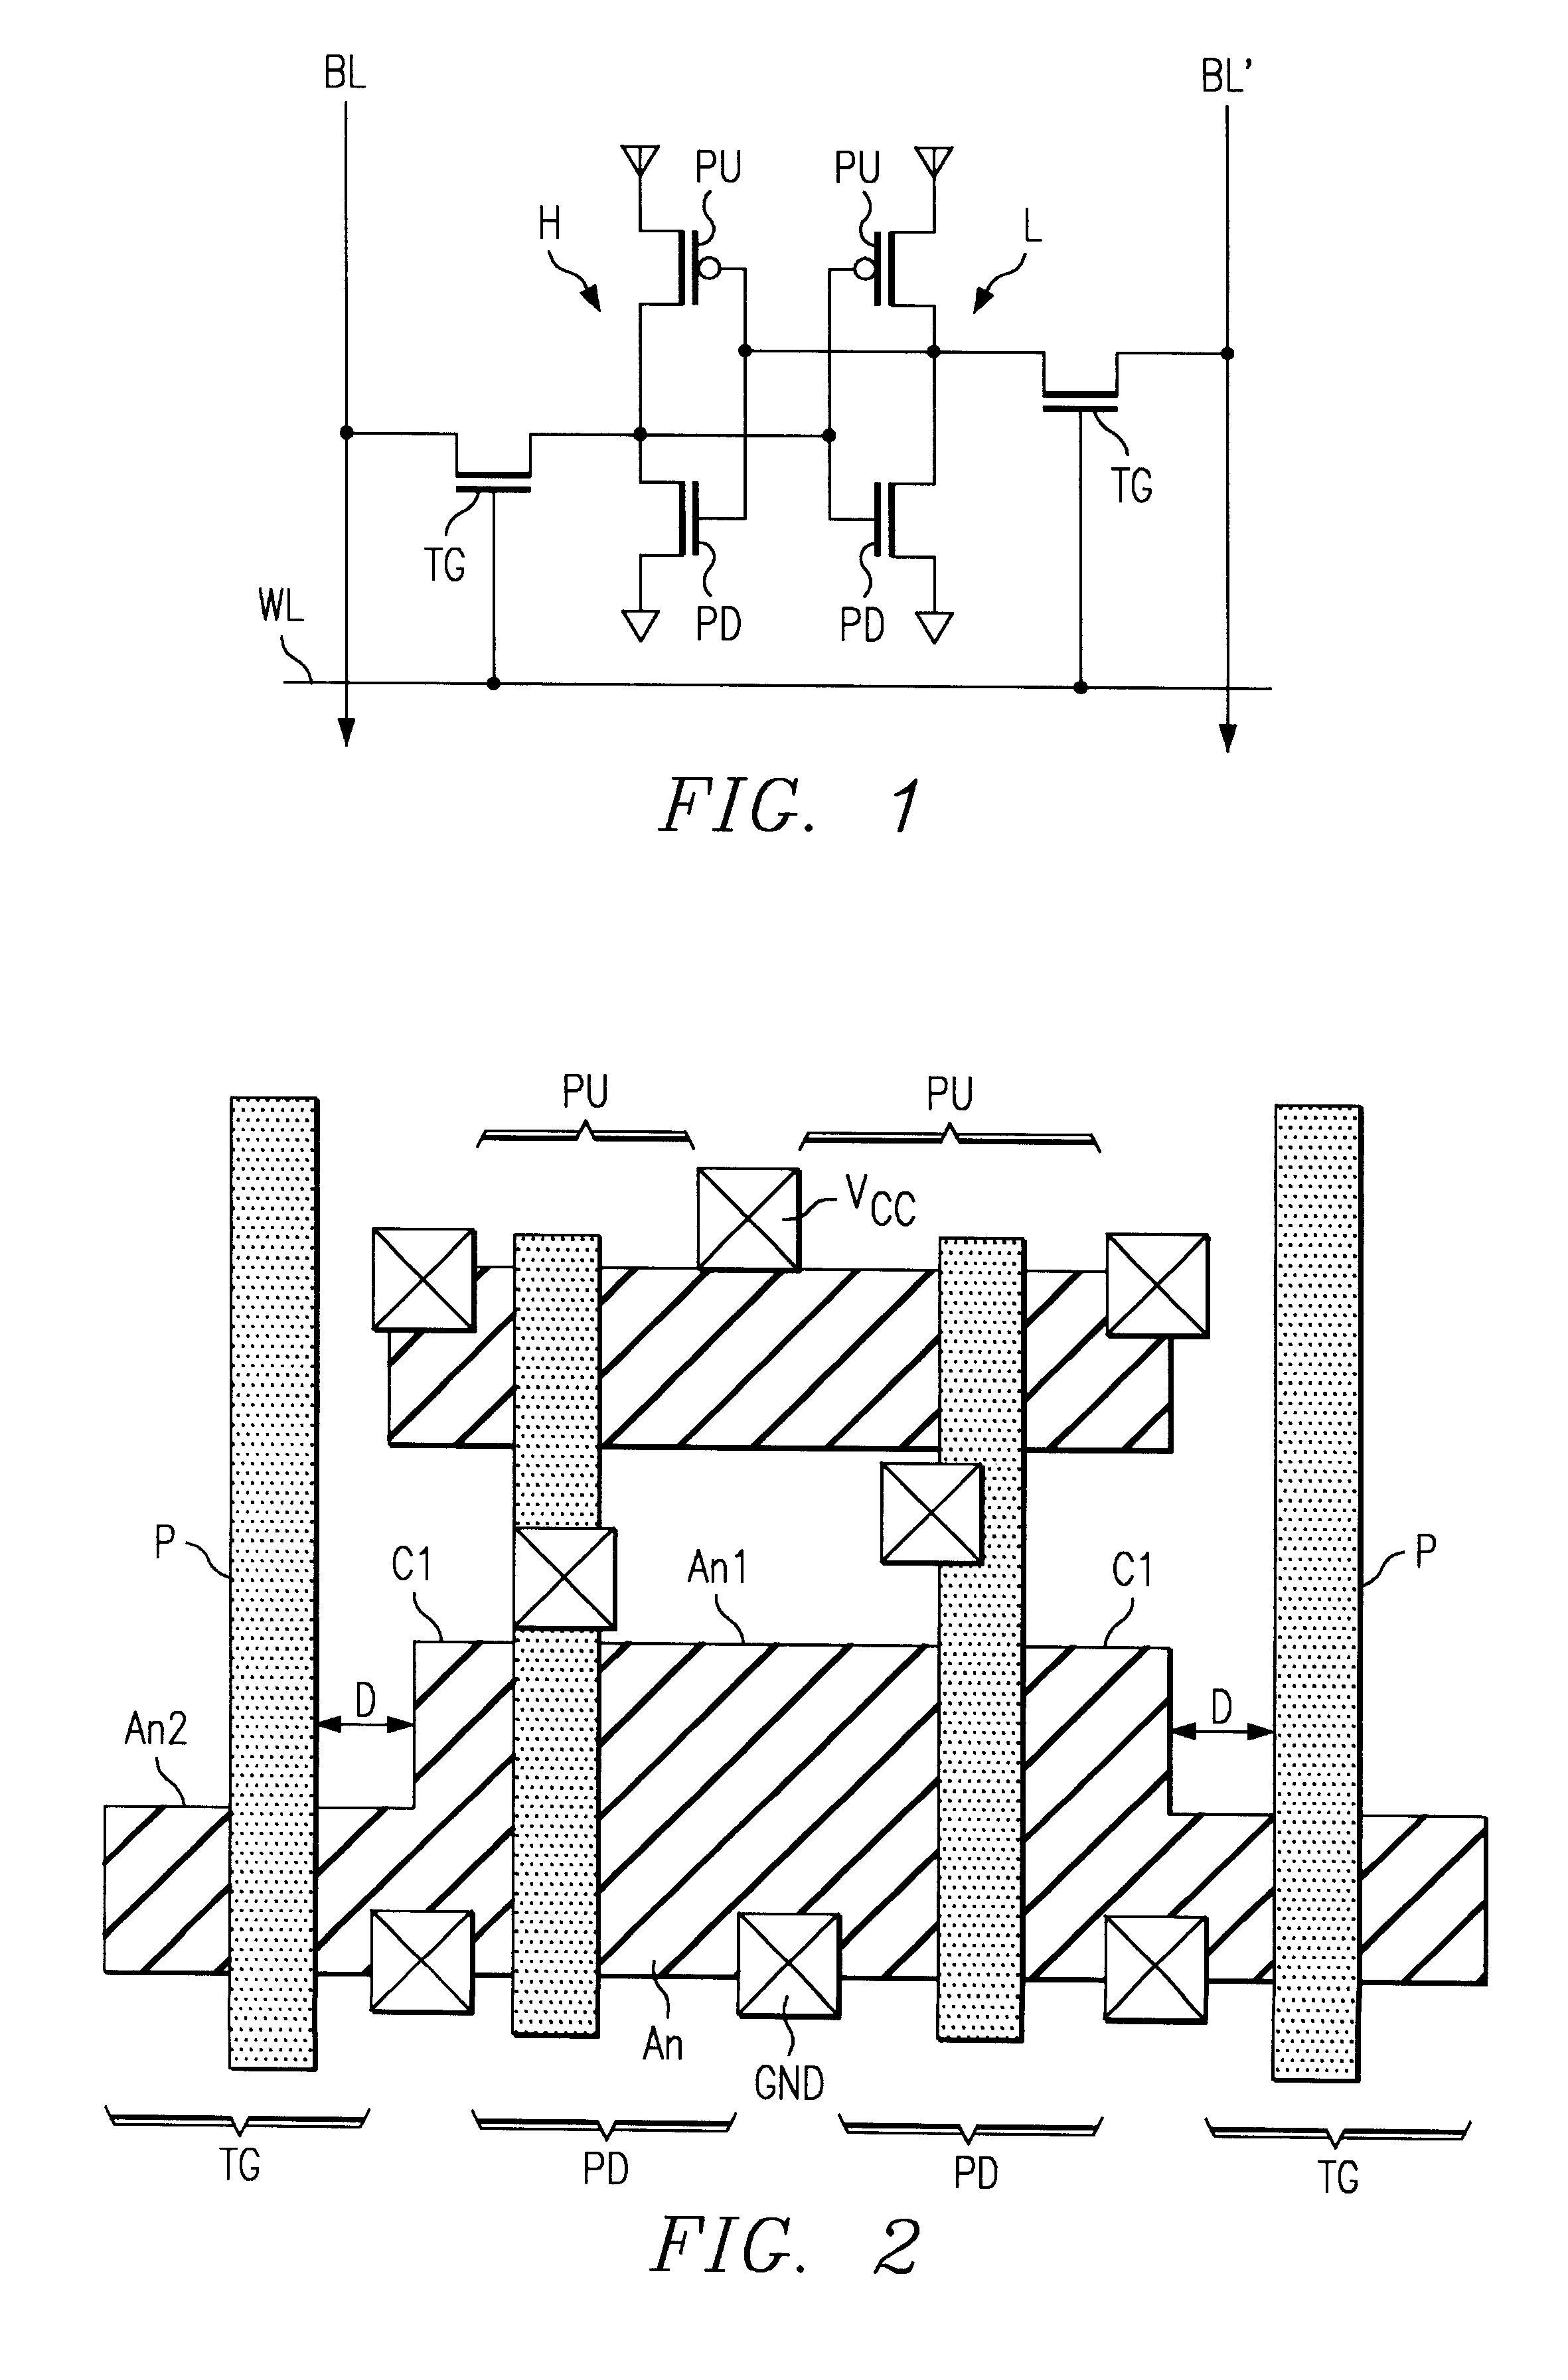 Circuit and method of fabricating a memory cell for a static random access memory